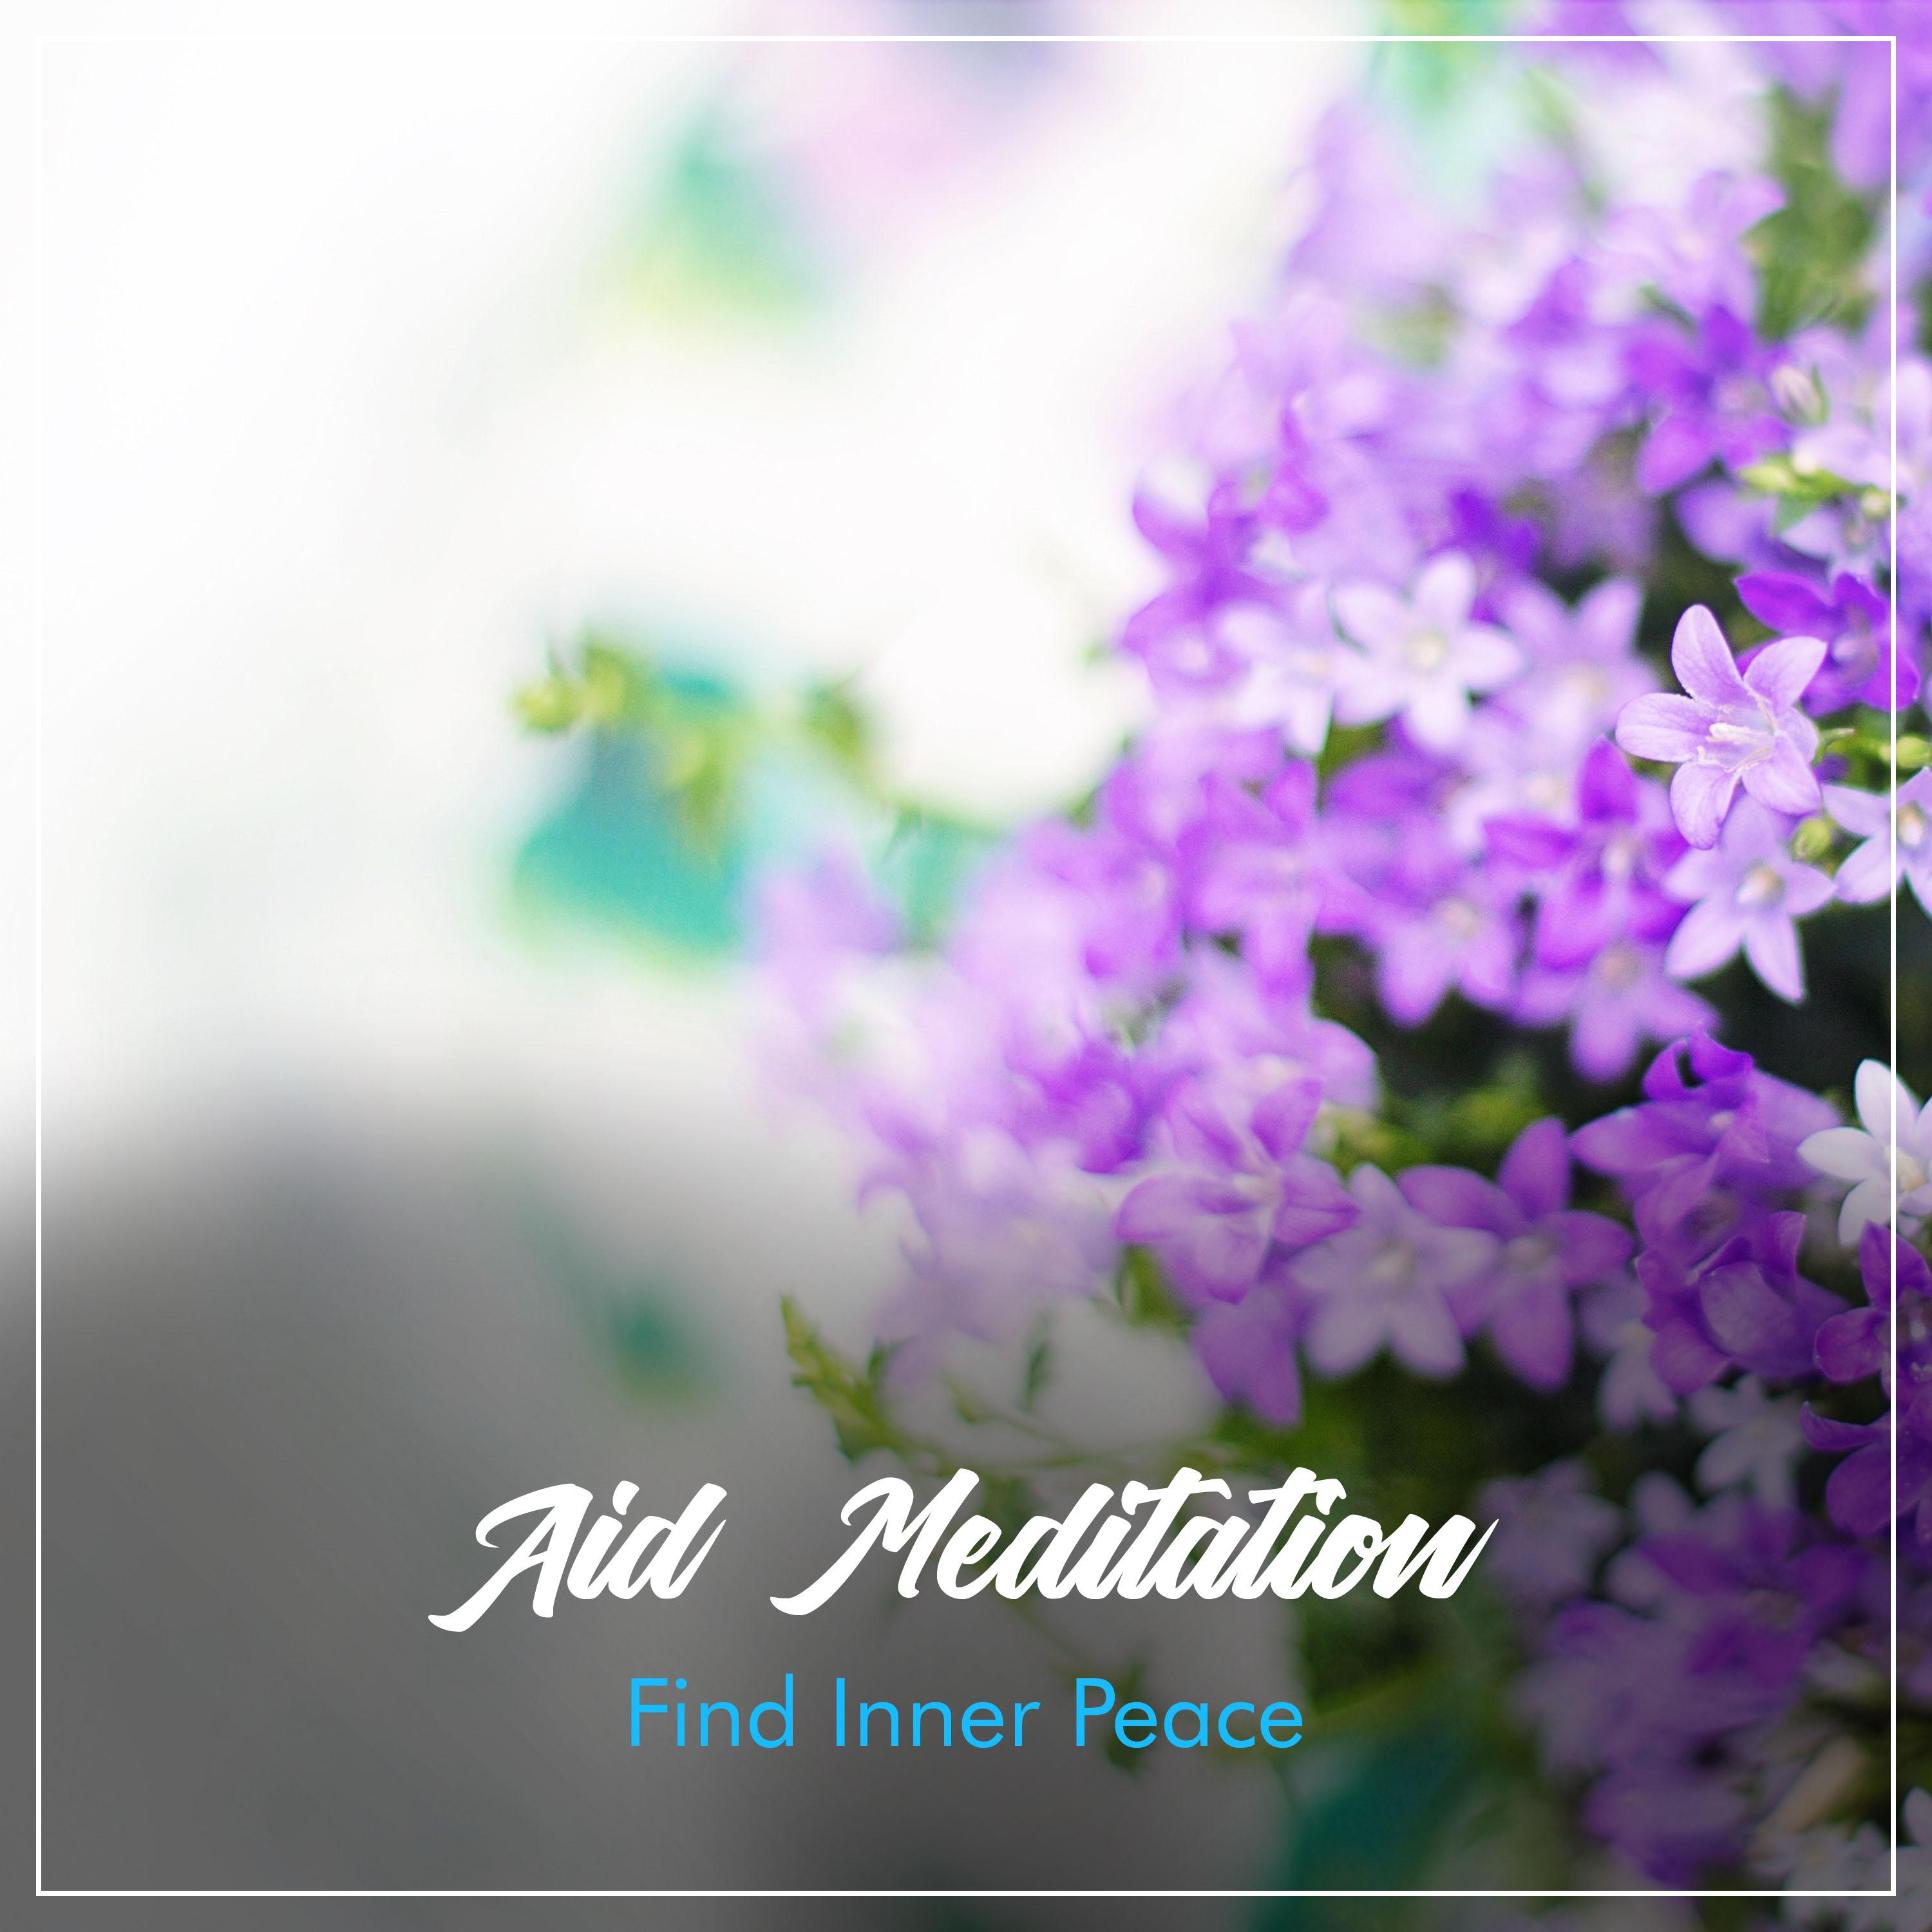 14 Tracks to Aid Meditation, Find Inner Peace & Achieve Zen